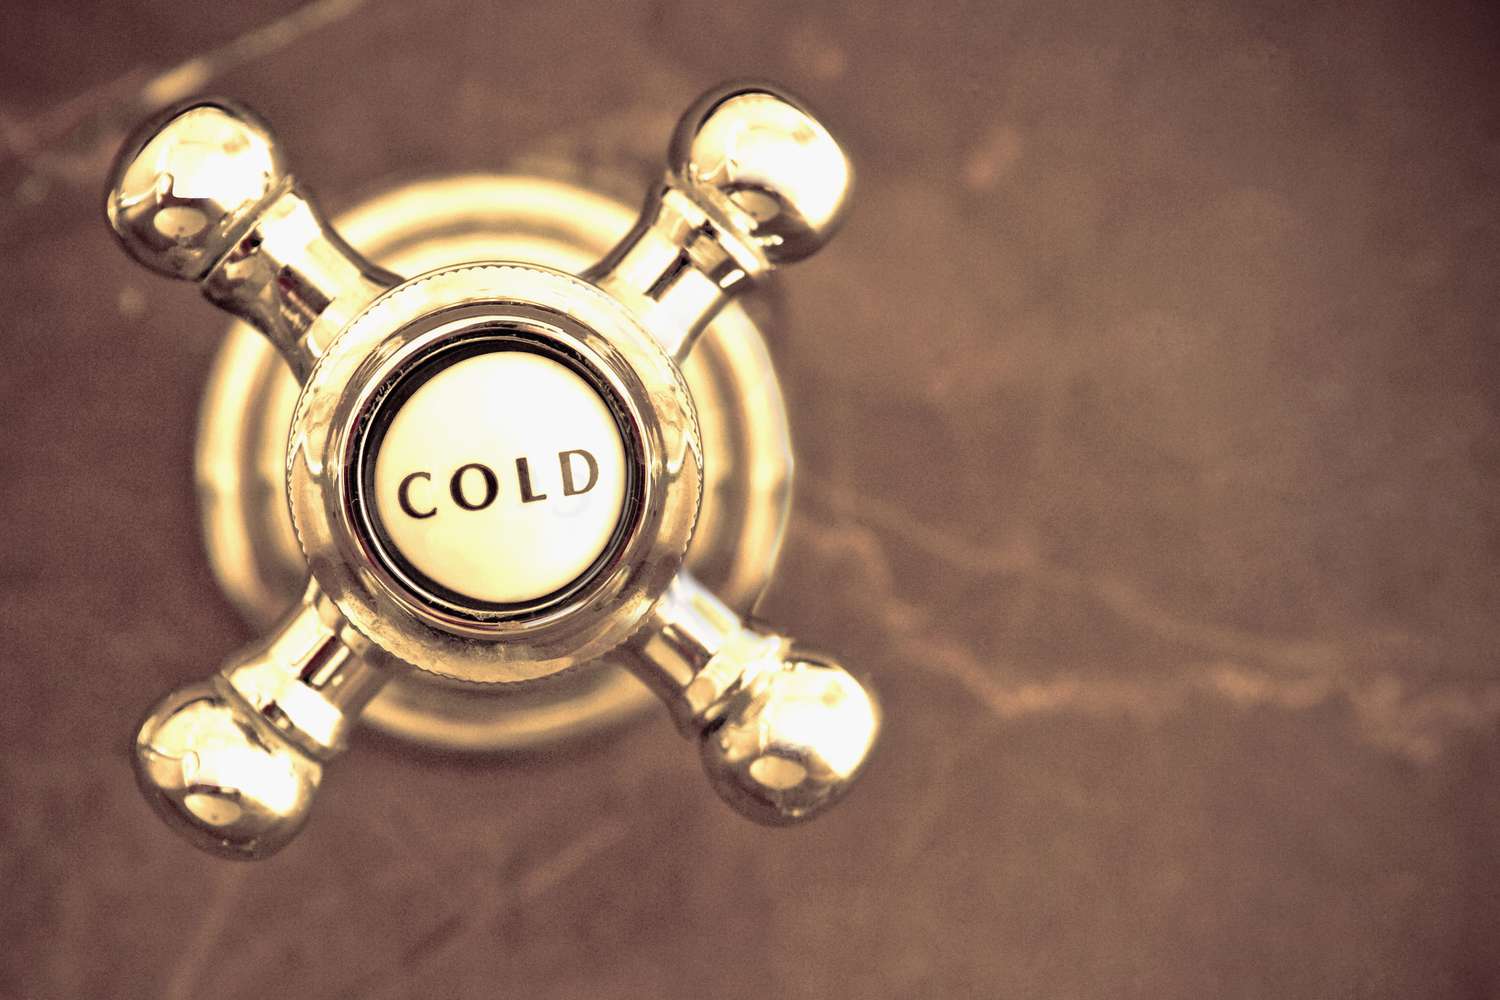 Close-up of a cold water shower knob